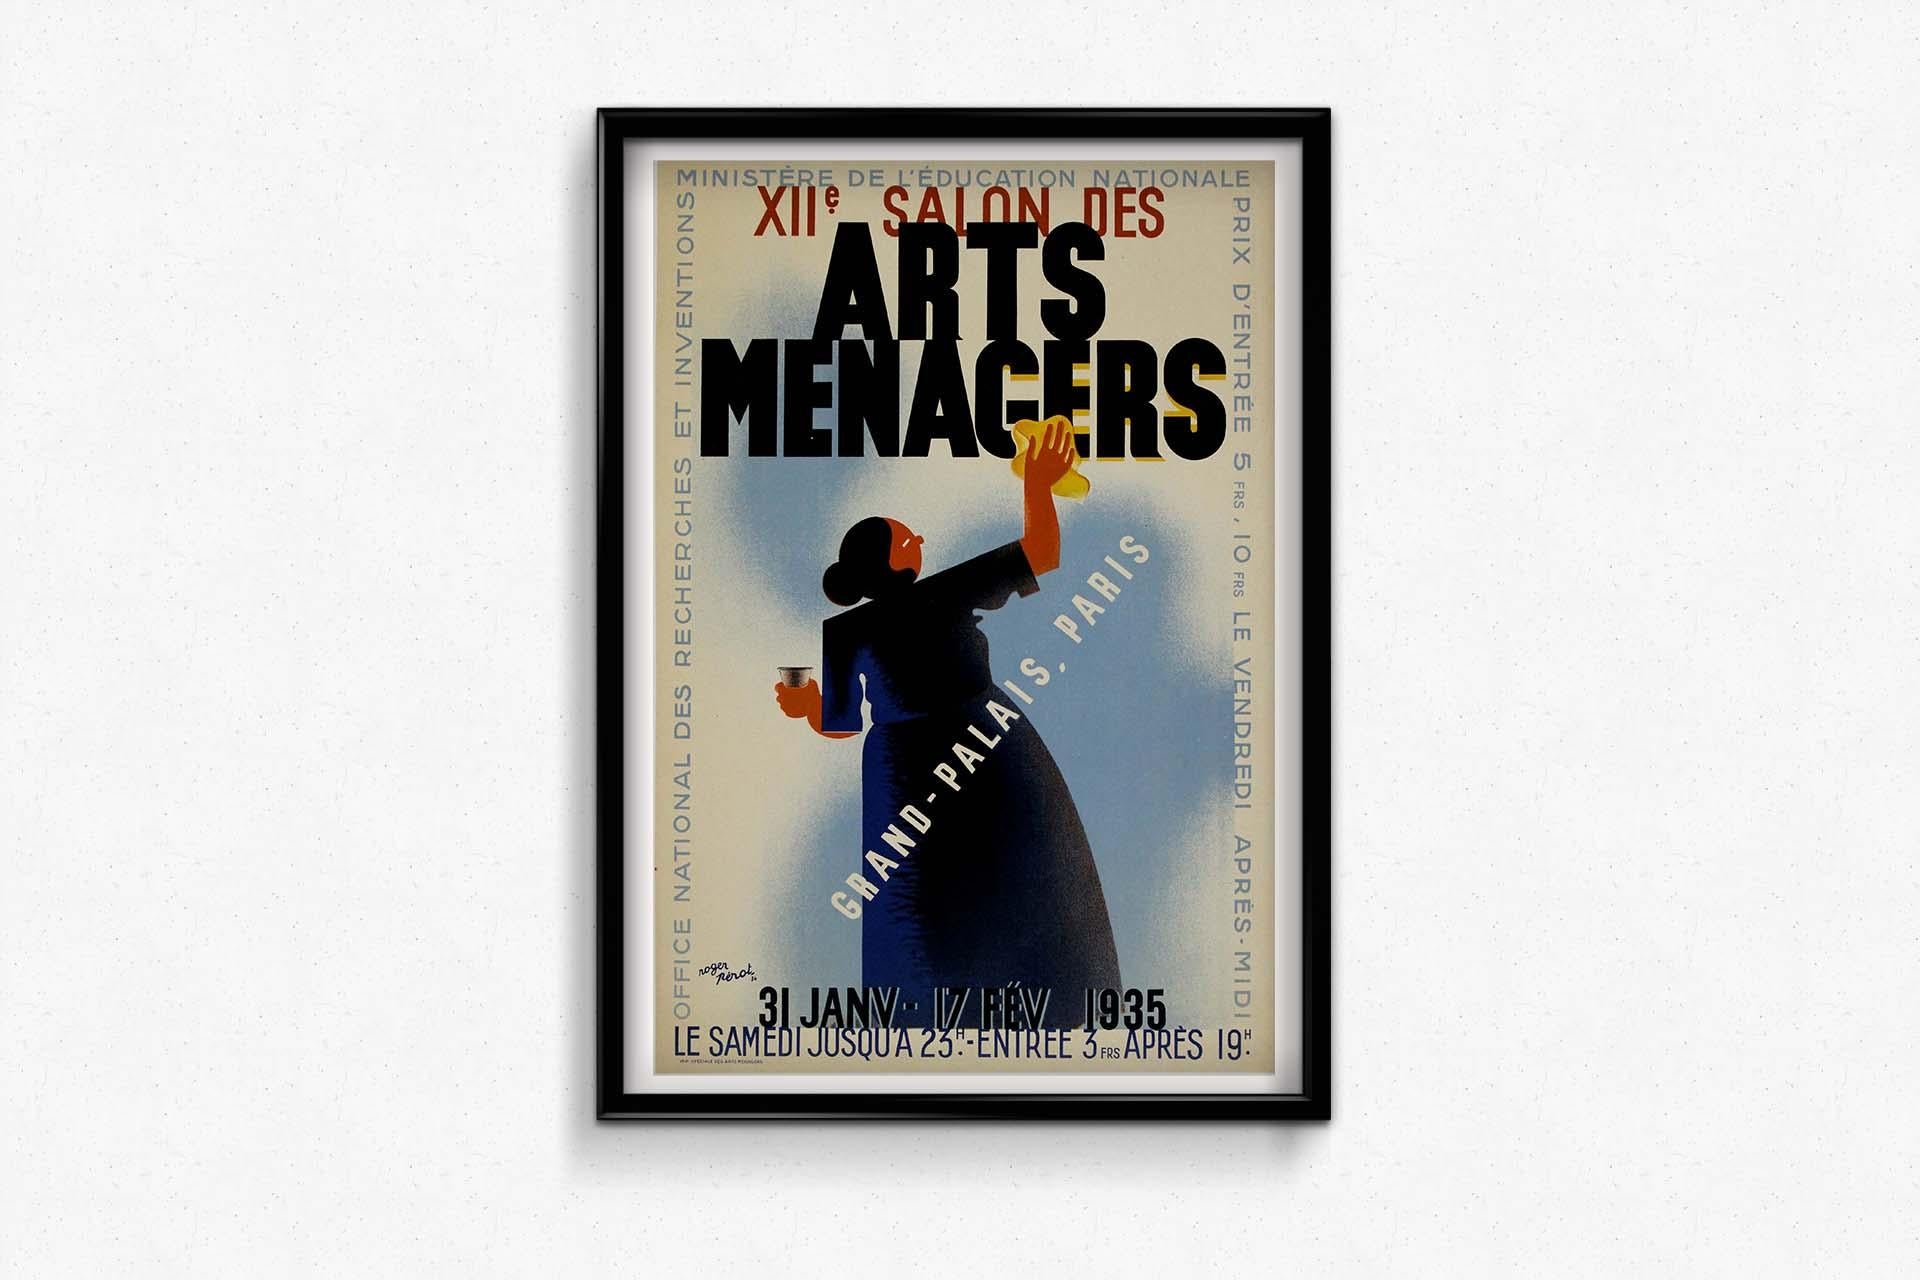 1935 original poster by Roger Pérot for the XIIe Salon des Arts Ménagers - Art Deco Print by Roger Perot